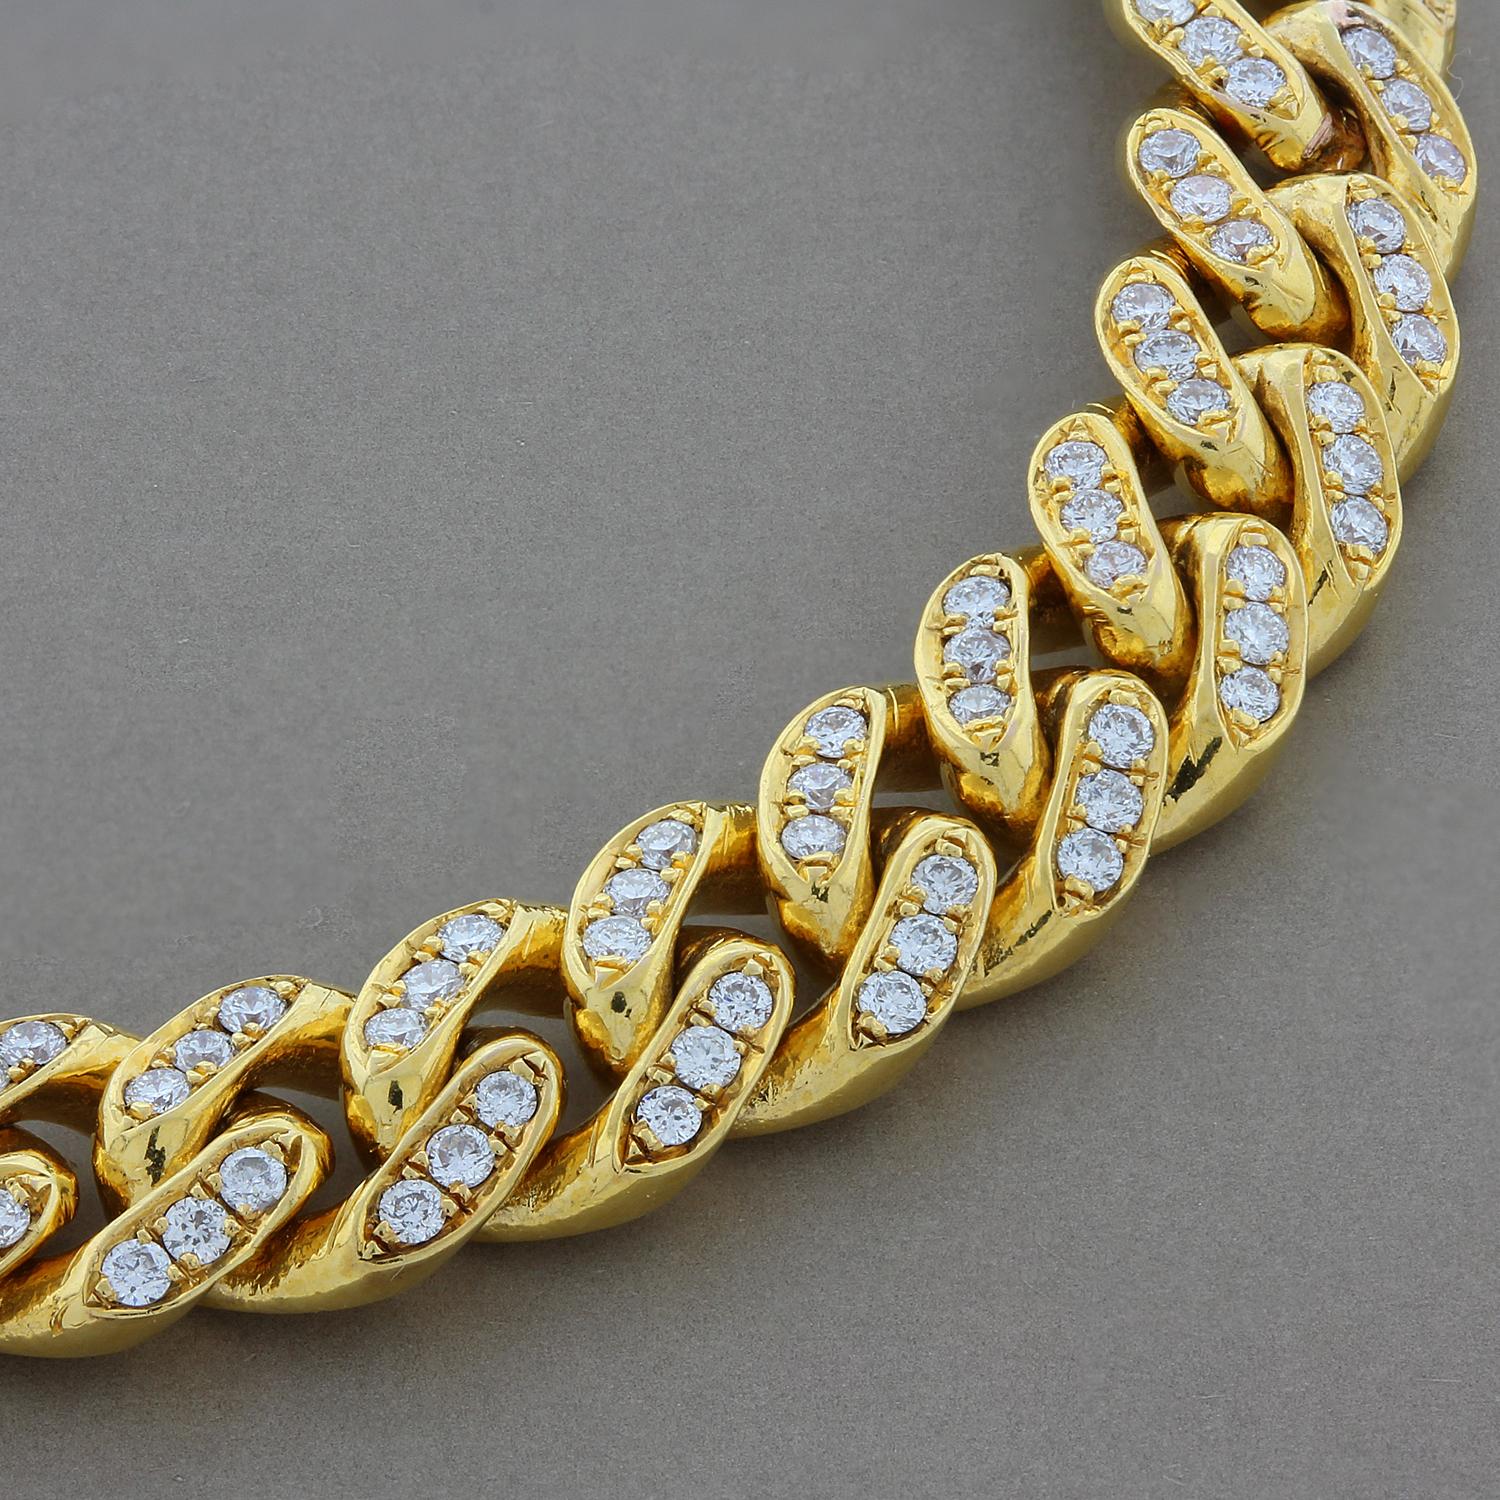 A perfect Cuban link bracelet to wear day or night.  It features 2.71 carats of VS quality round cut diamonds prong set in each 18K yellow gold link. The bracelet is secured by a lobster claw clasp.

Fits wrists up to 7.5 inches
Bracelet Width: 0.25